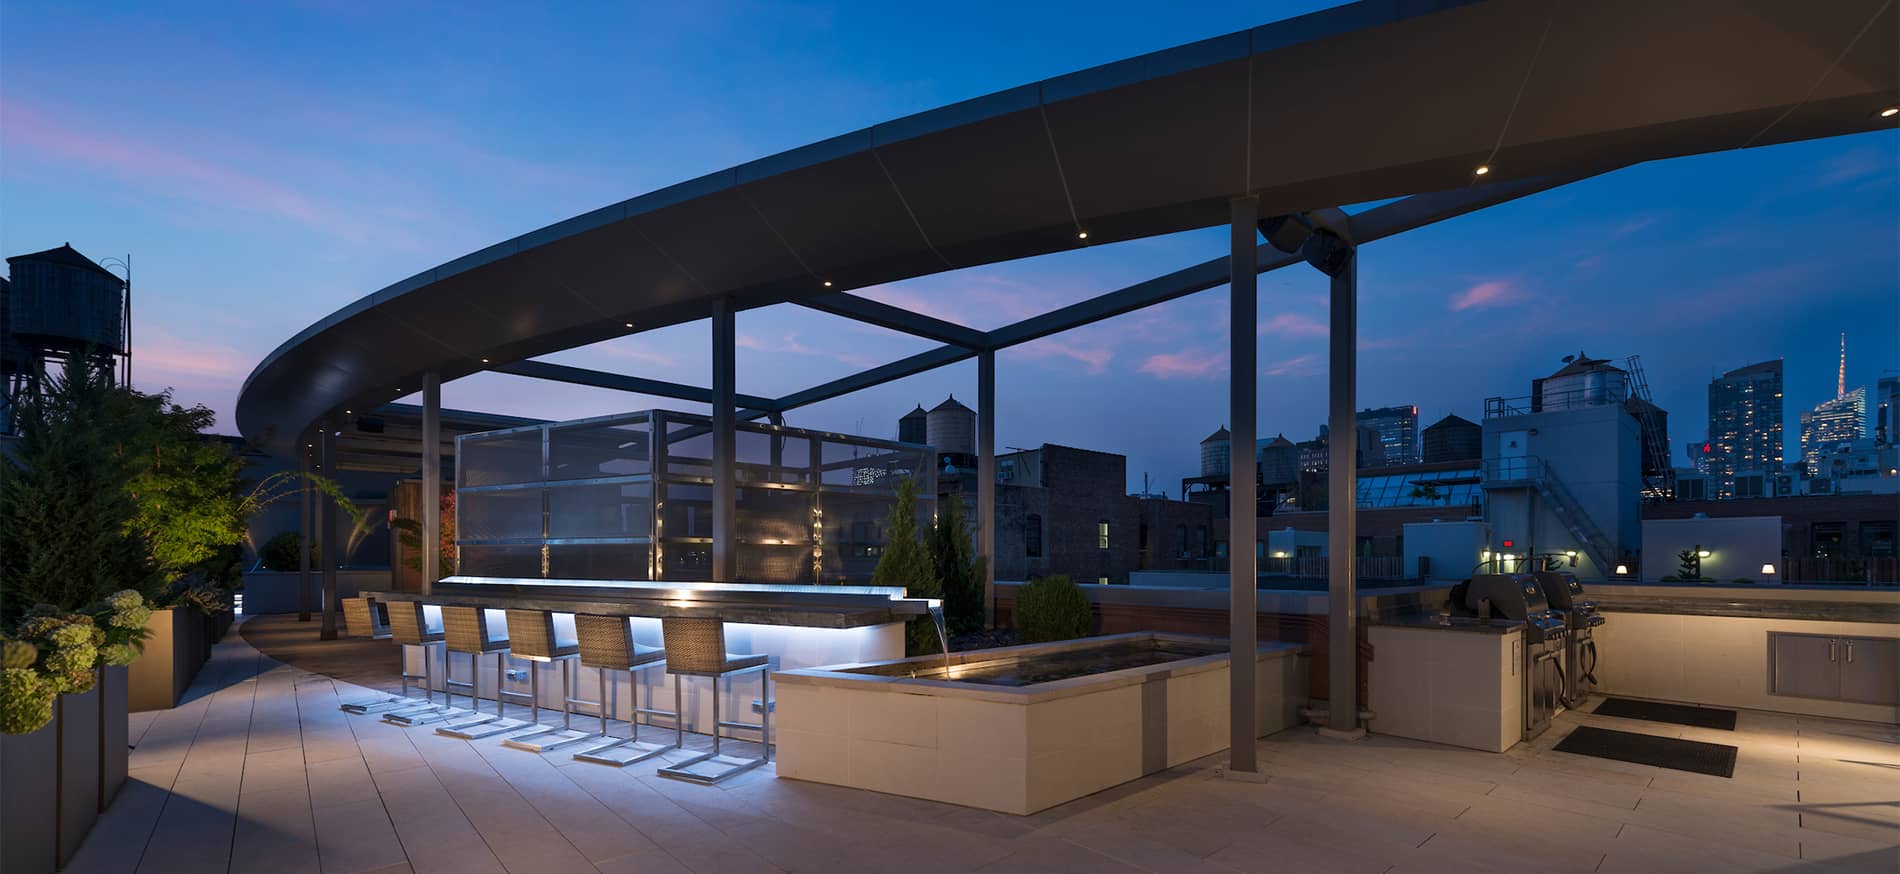 21 Chelsea Rooftop Lounge